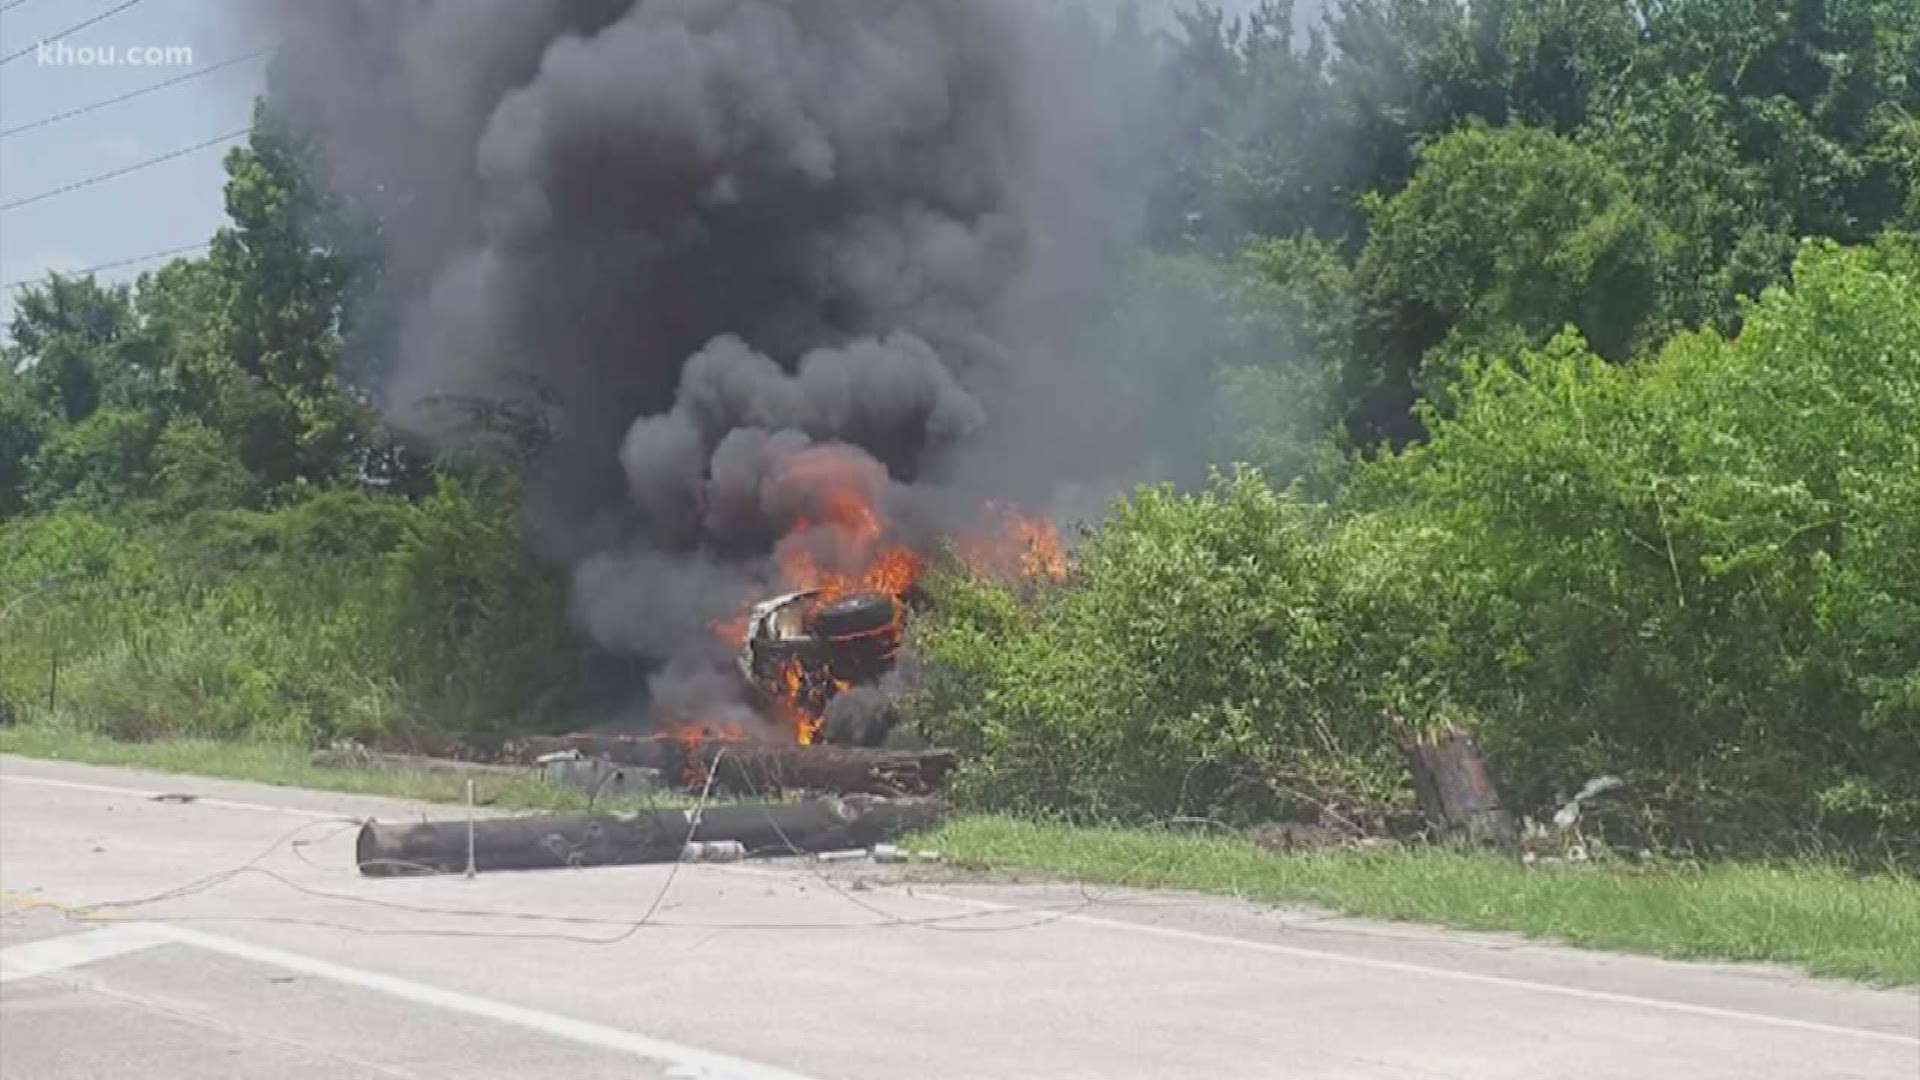 Several northbound lanes of the Hardy Toll Road in north Houston were closed down after a car hit a light pole and caught fire. The driver was able to get out and made it to the hospital with injuries that were not life-threatening.